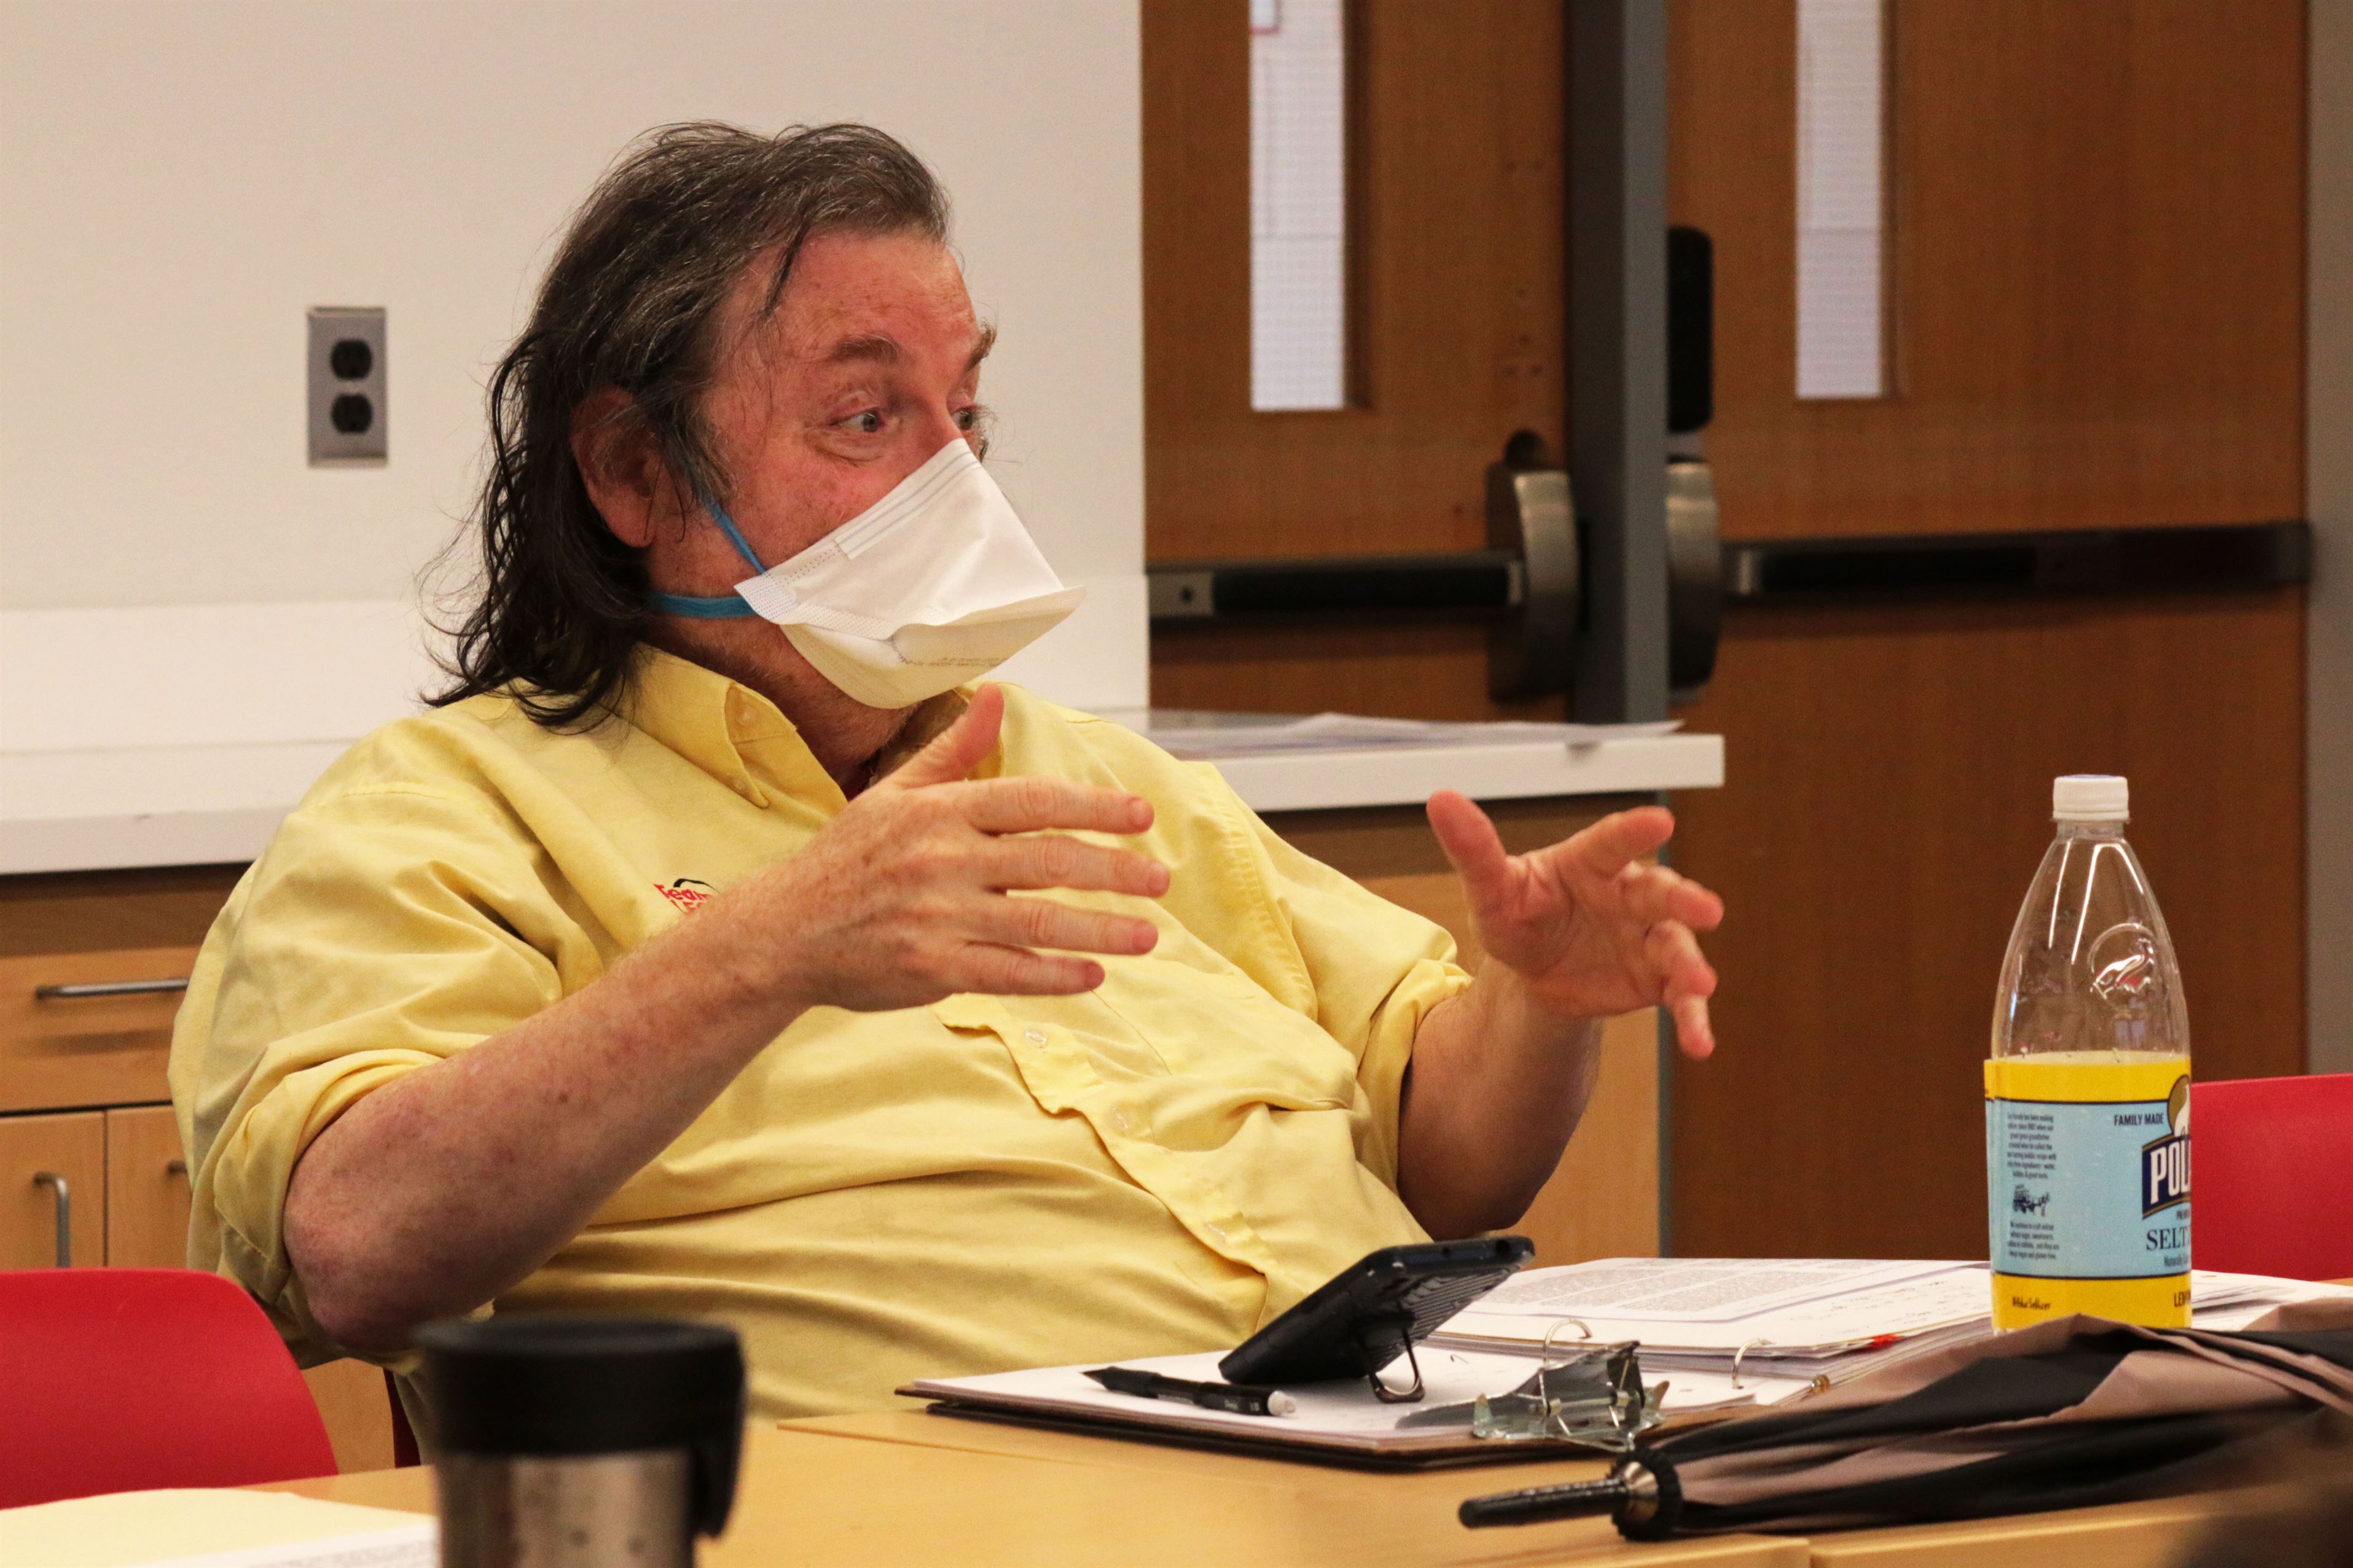 An unidentified person engages with folks in Dickinson Hall for the Philosophy for Lunch program.